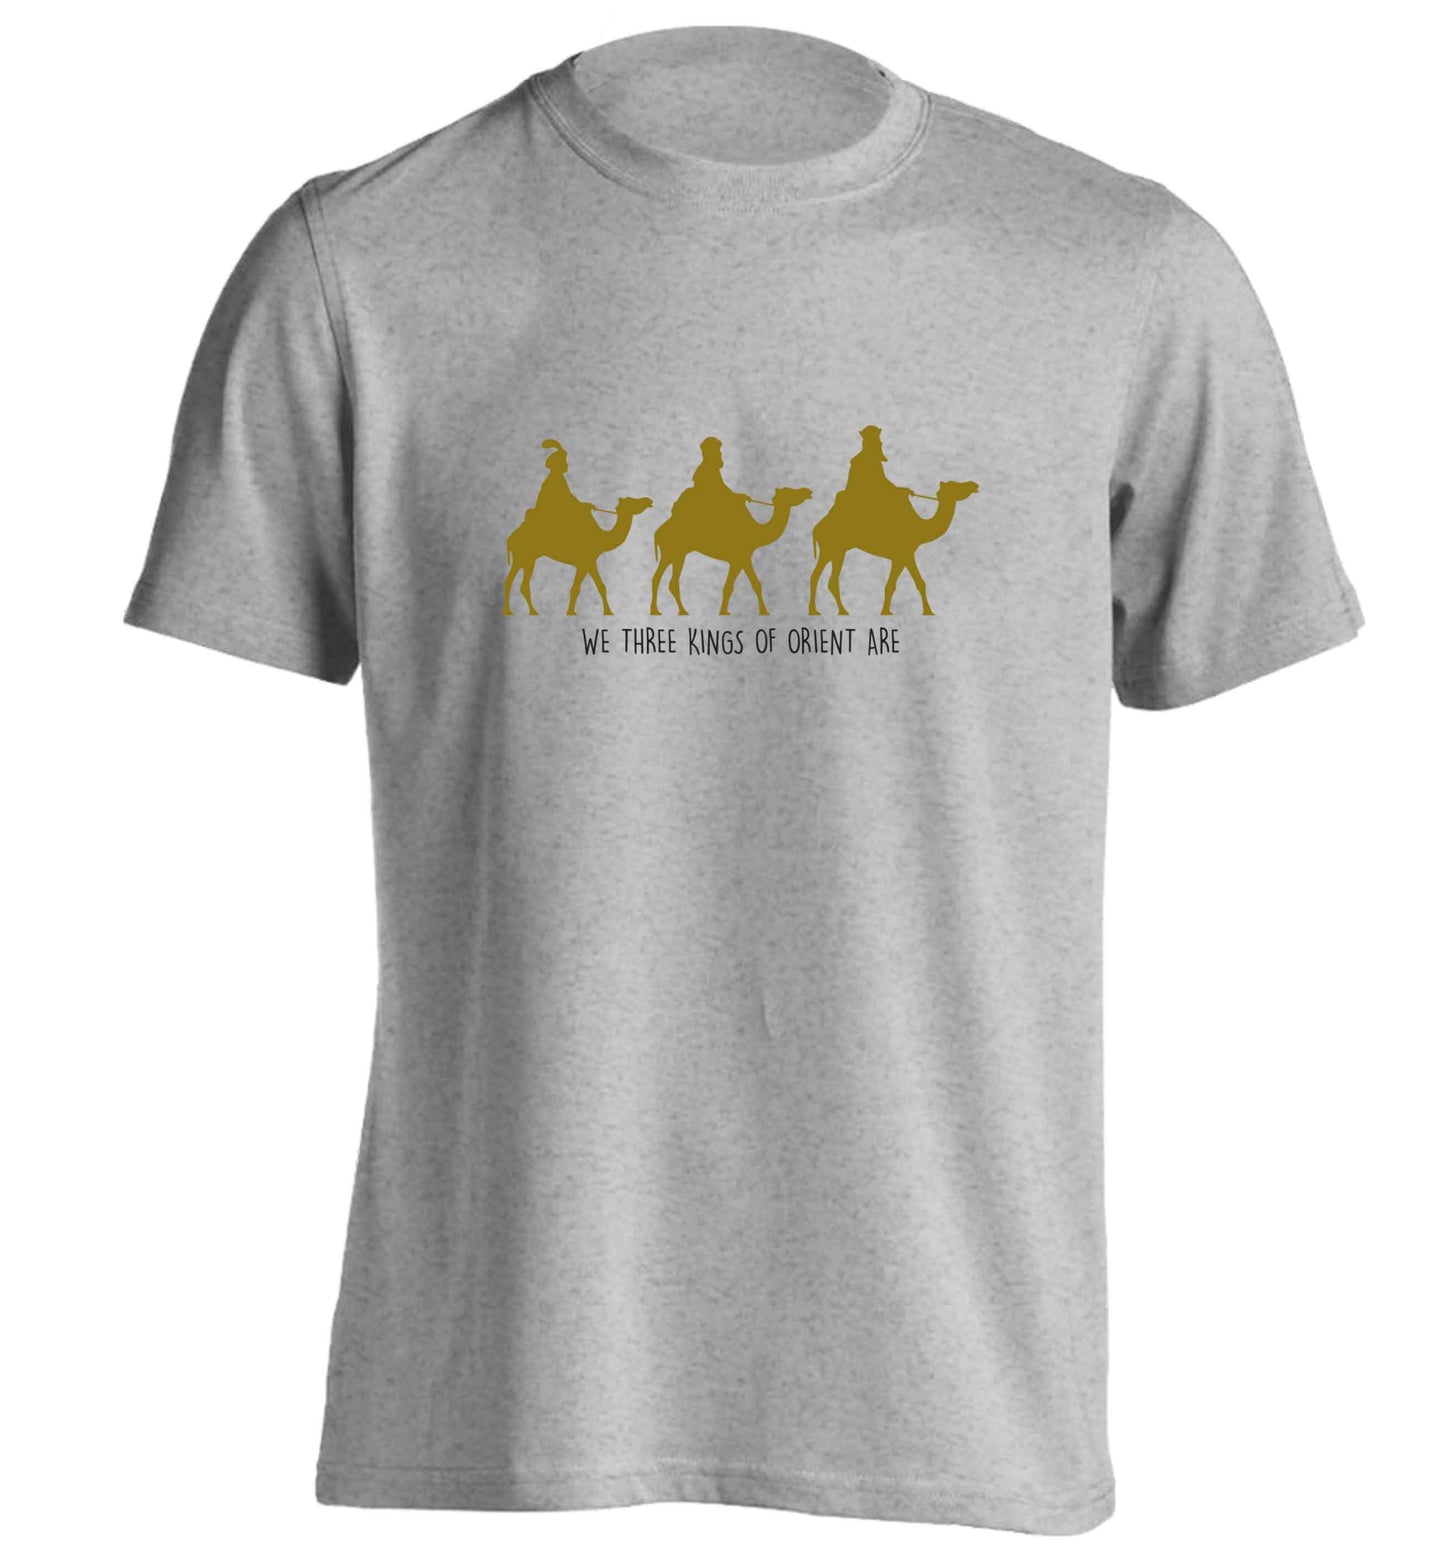 We three kings of orient are adults unisex grey Tshirt 2XL